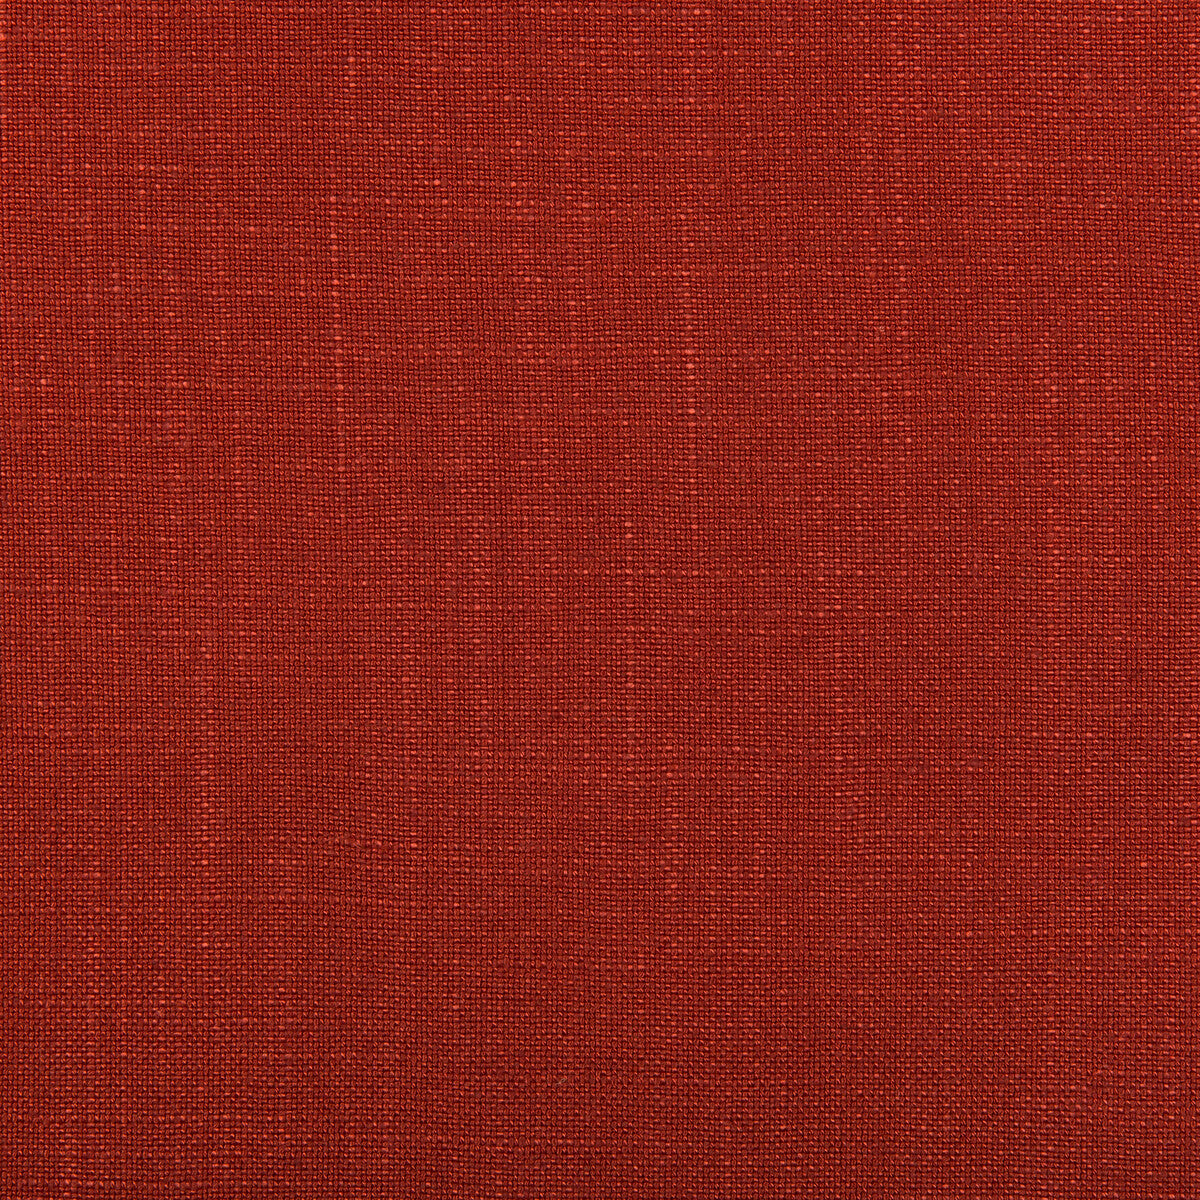 Aura fabric in fire color - pattern 35520.19.0 - by Kravet Design